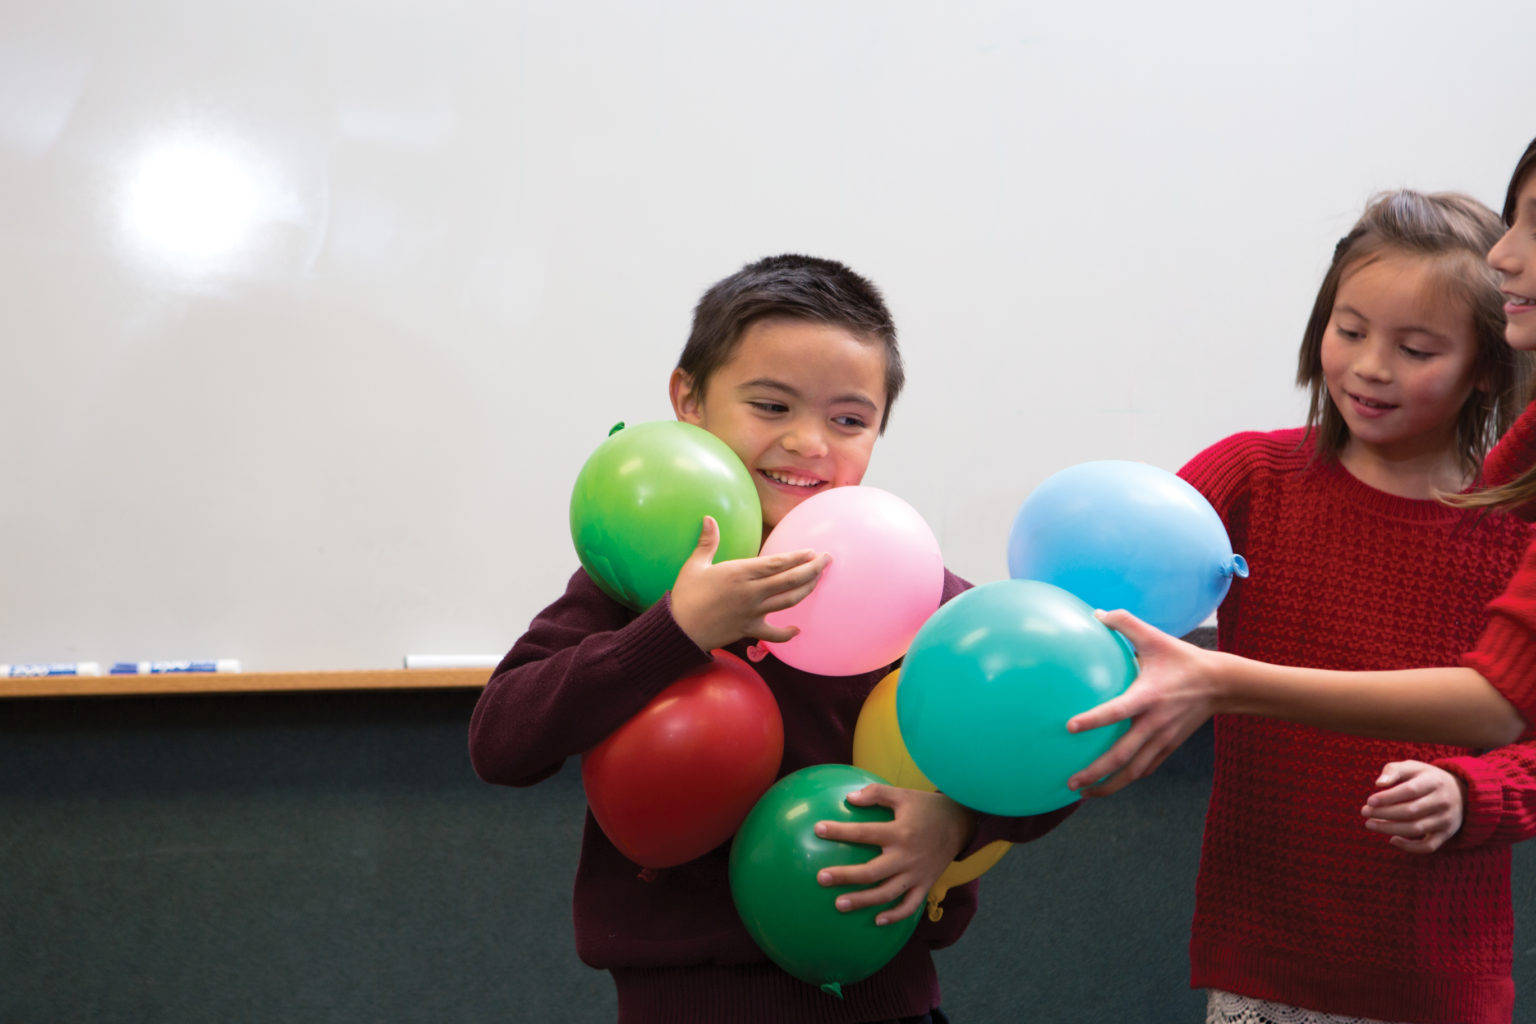 Elementary aged boy trying to hold lots of colorful balloons in his arms. His classmates are trying to add more and more to what he's carrying.